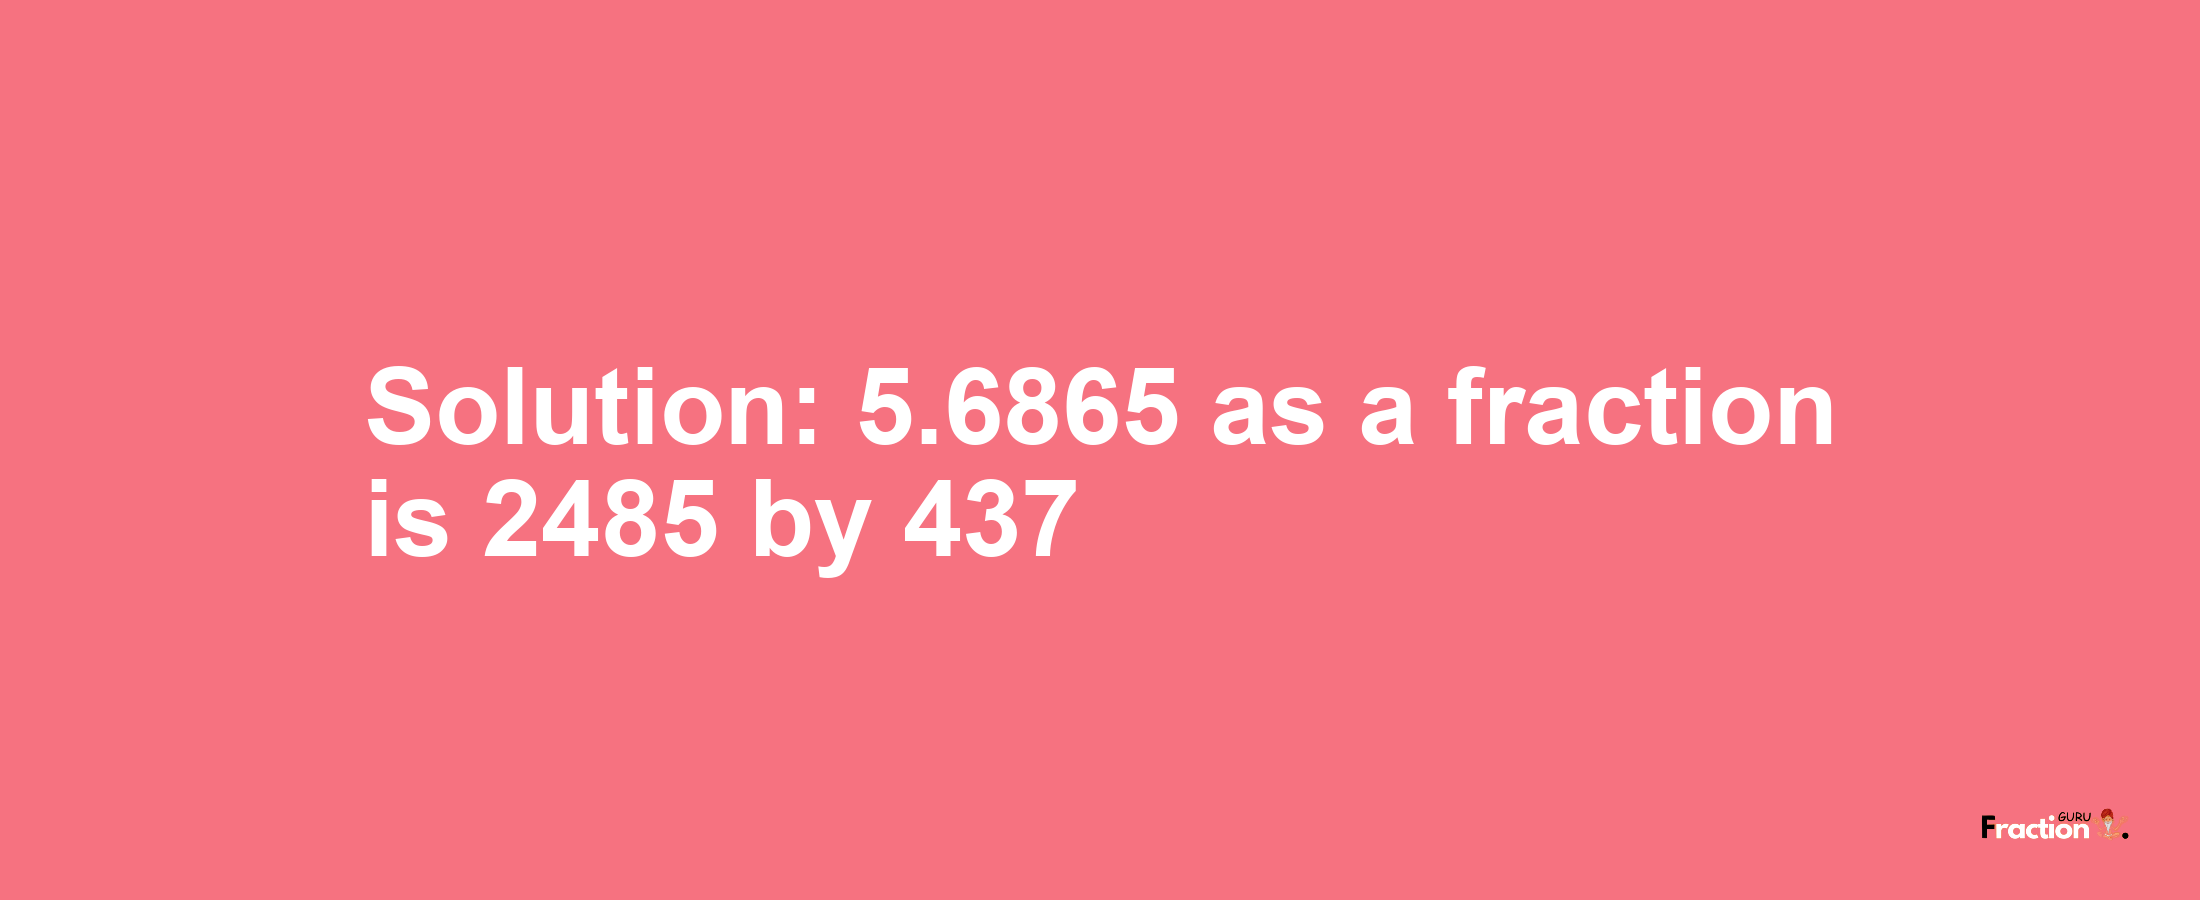 Solution:5.6865 as a fraction is 2485/437